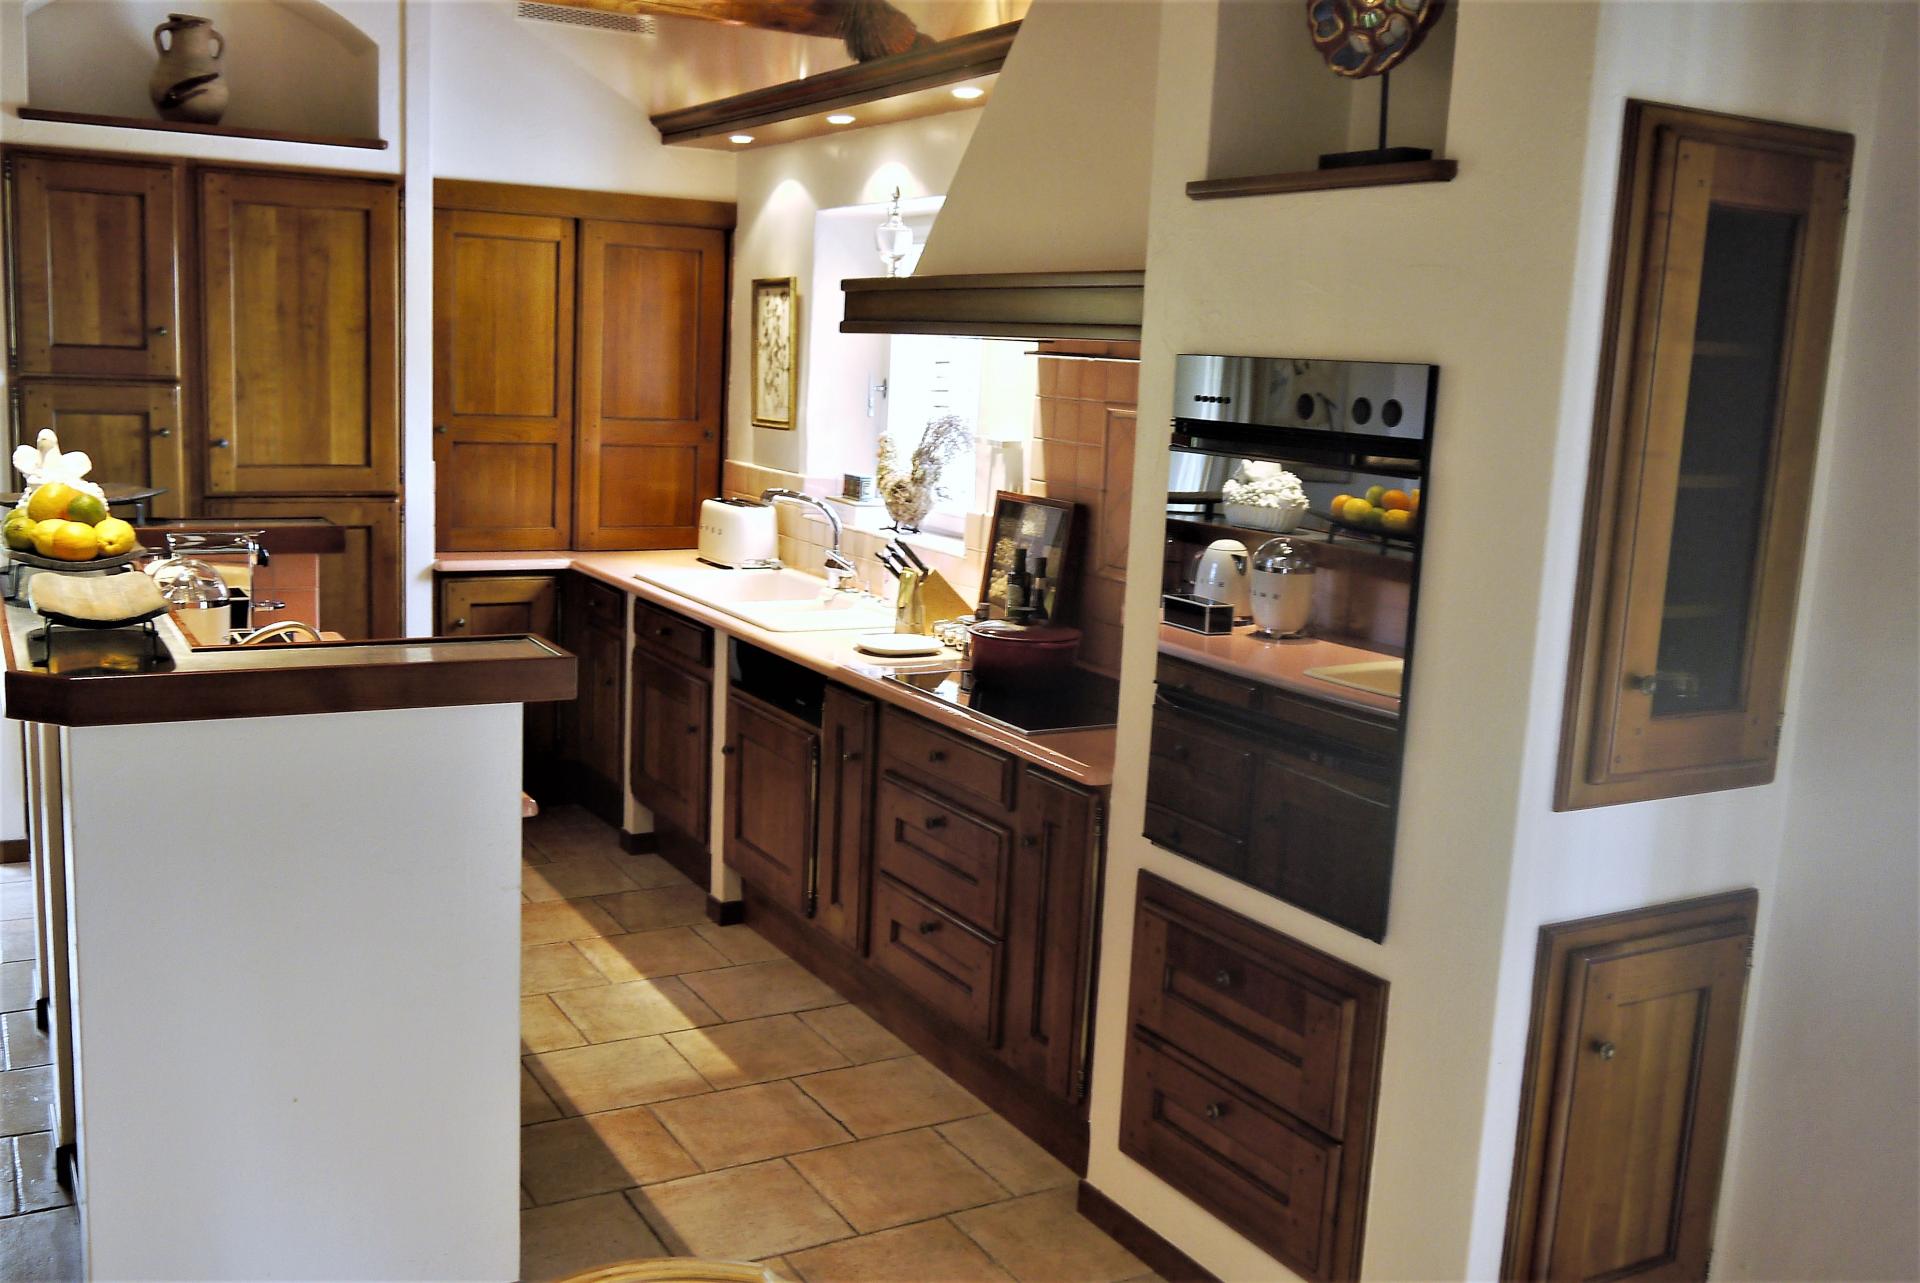 THE KITCHEN IN LA VILLA ANGELE HOLIDAY RENTAL IN LUBERON PROVENCE